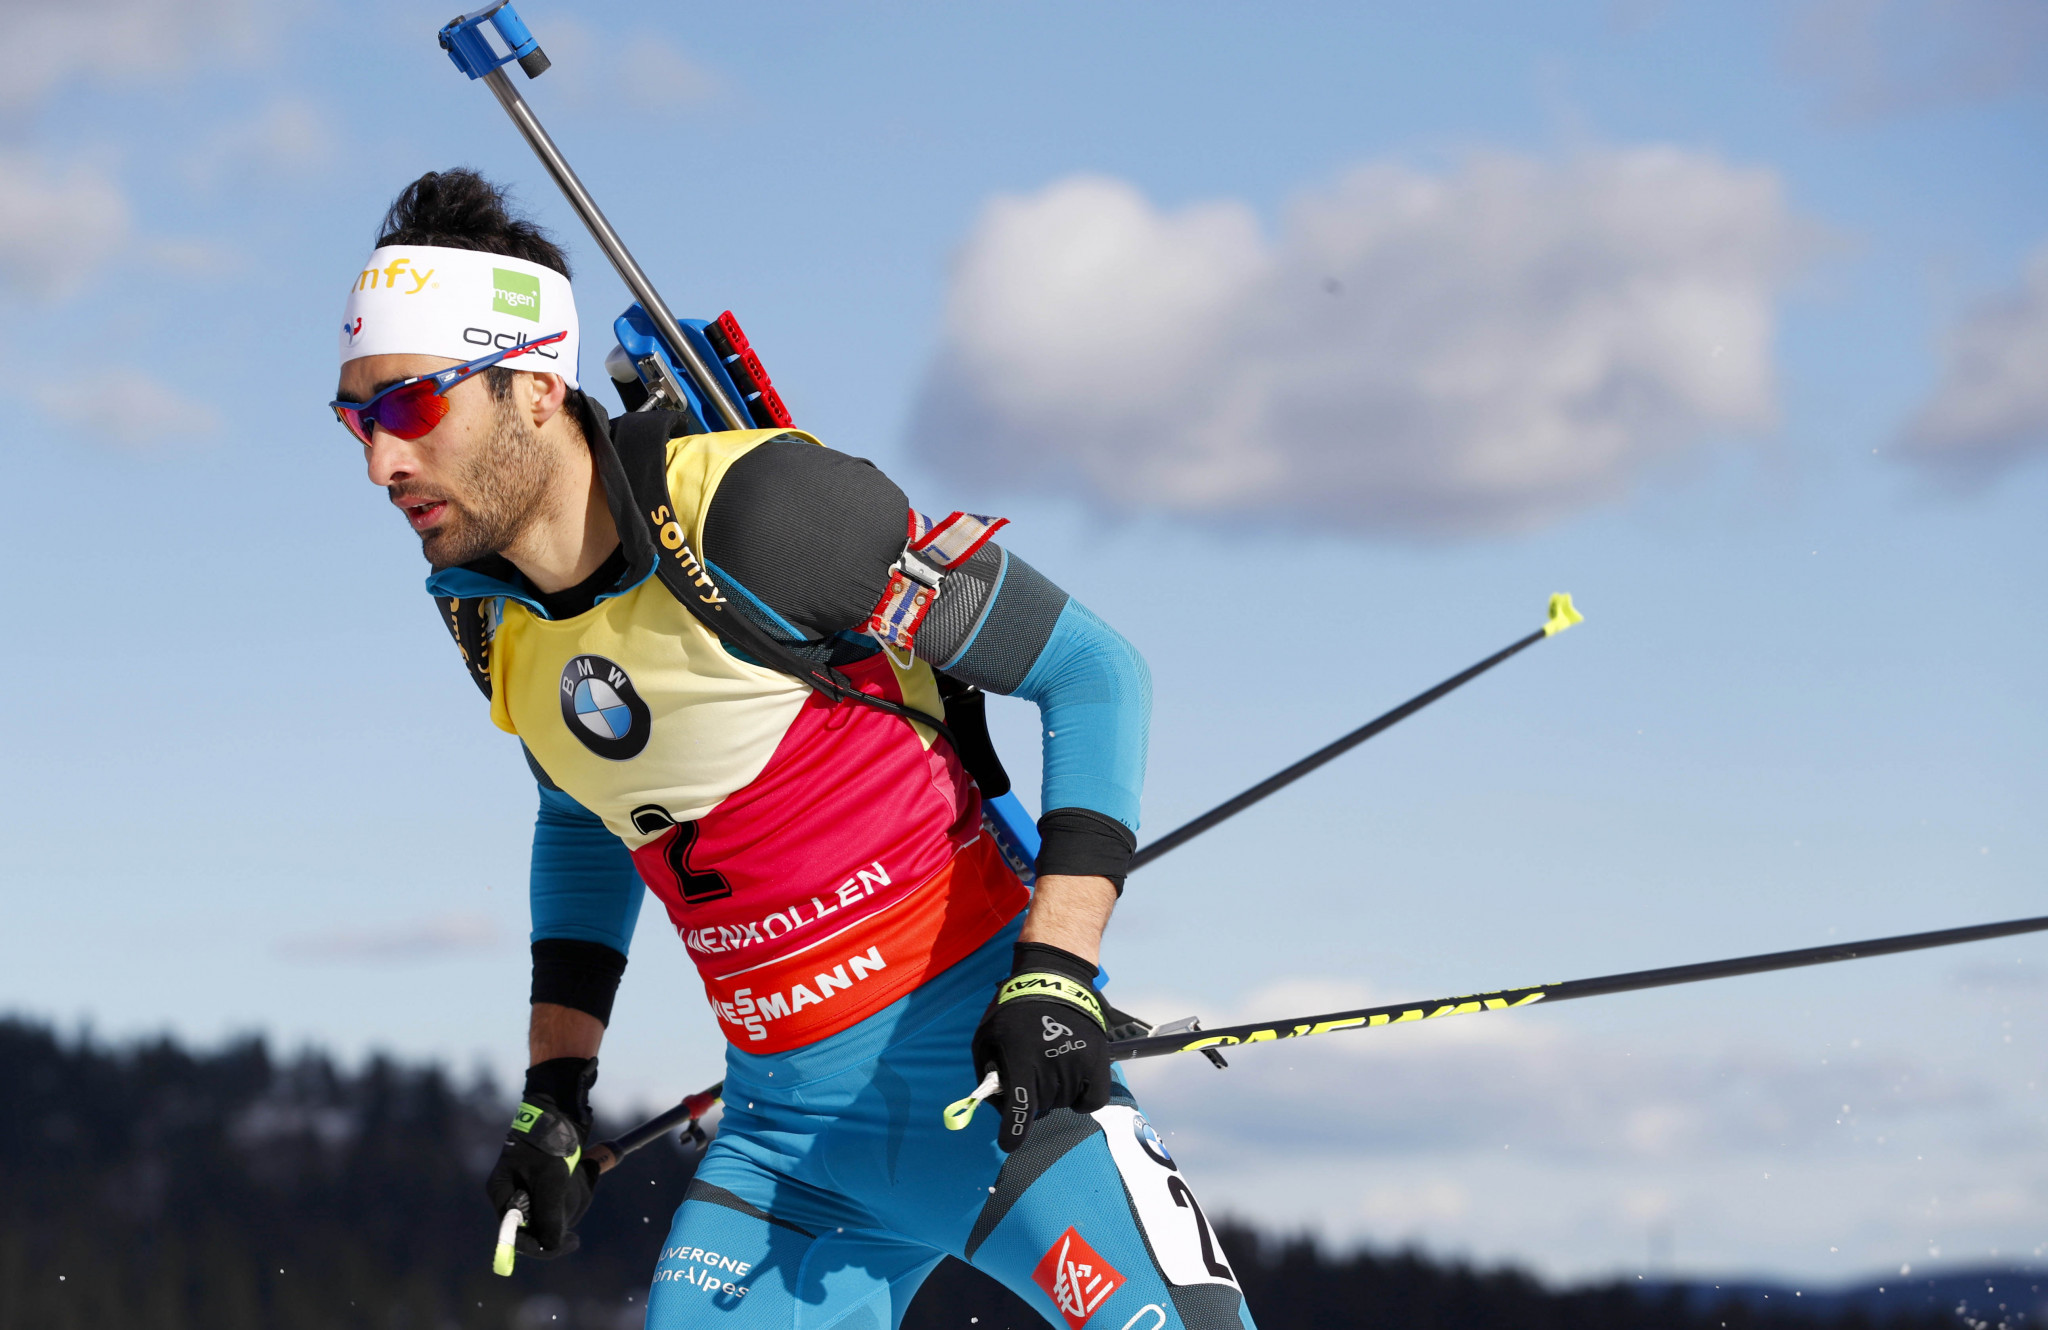 Martin Fourcade has been named as France's flag bearer at the Pyeongchang 2018 Winter Olympic Games ©Getty Images